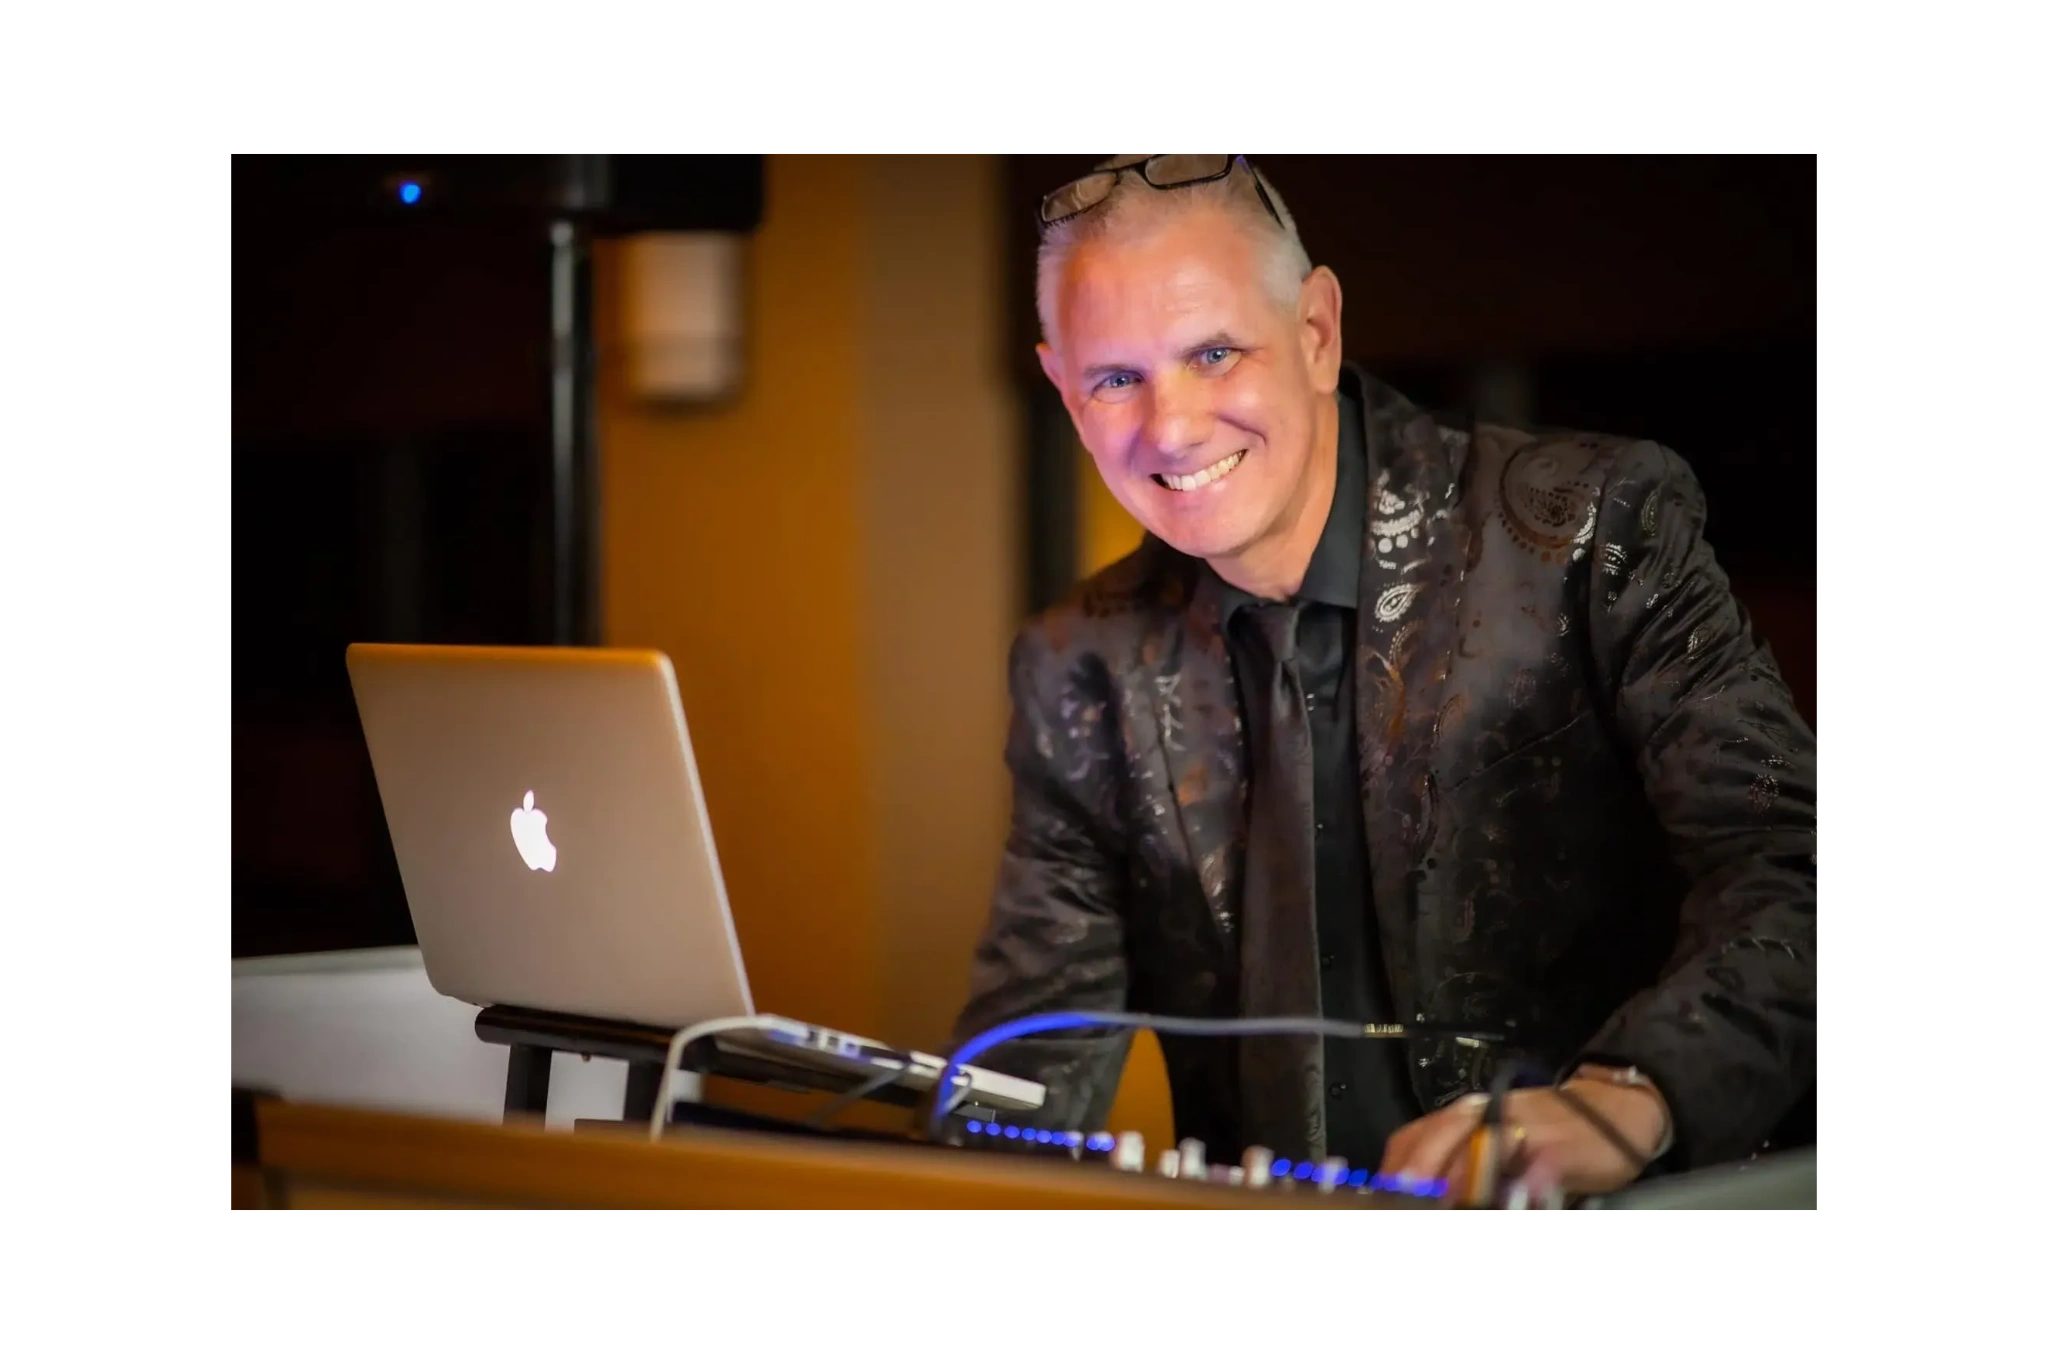 DJ Tony Fynan in a stylish suit plays a DJ set at a wedding, creating a lively atmosphere for all.